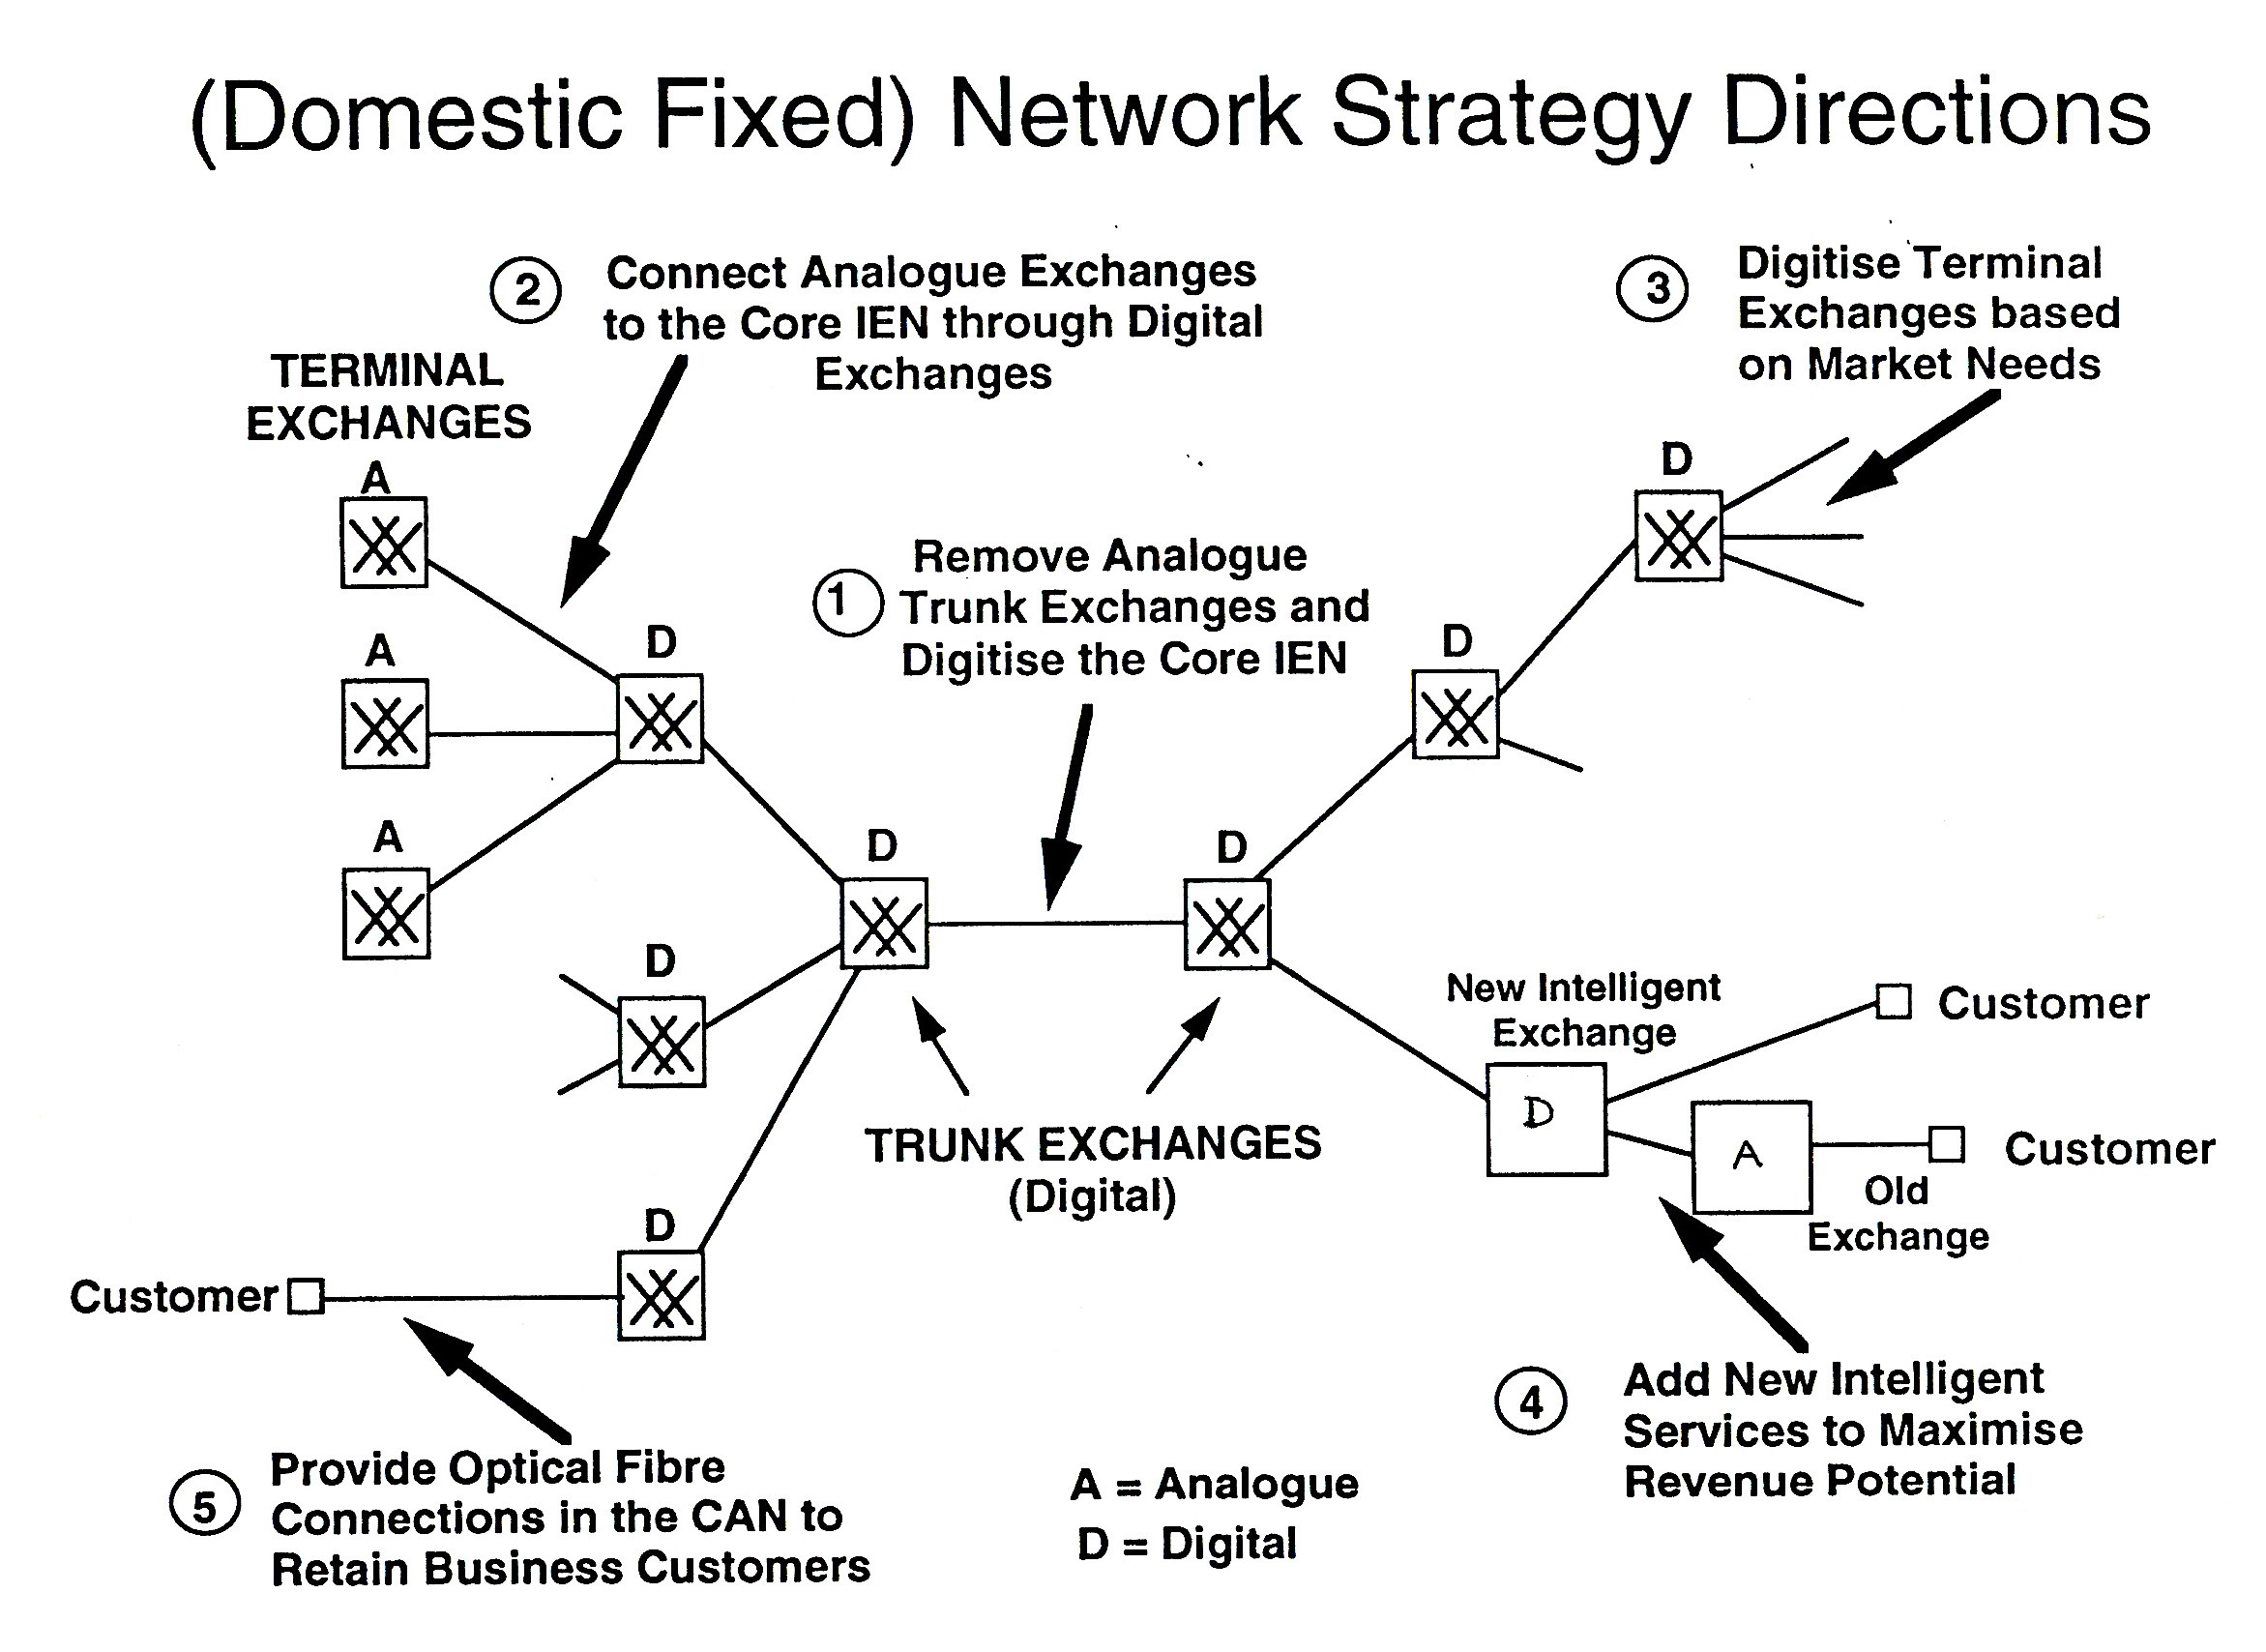 Figure 4. Plan D - A competitive Hybrid Analogue/Digital Network with Two Stages & Five Steps